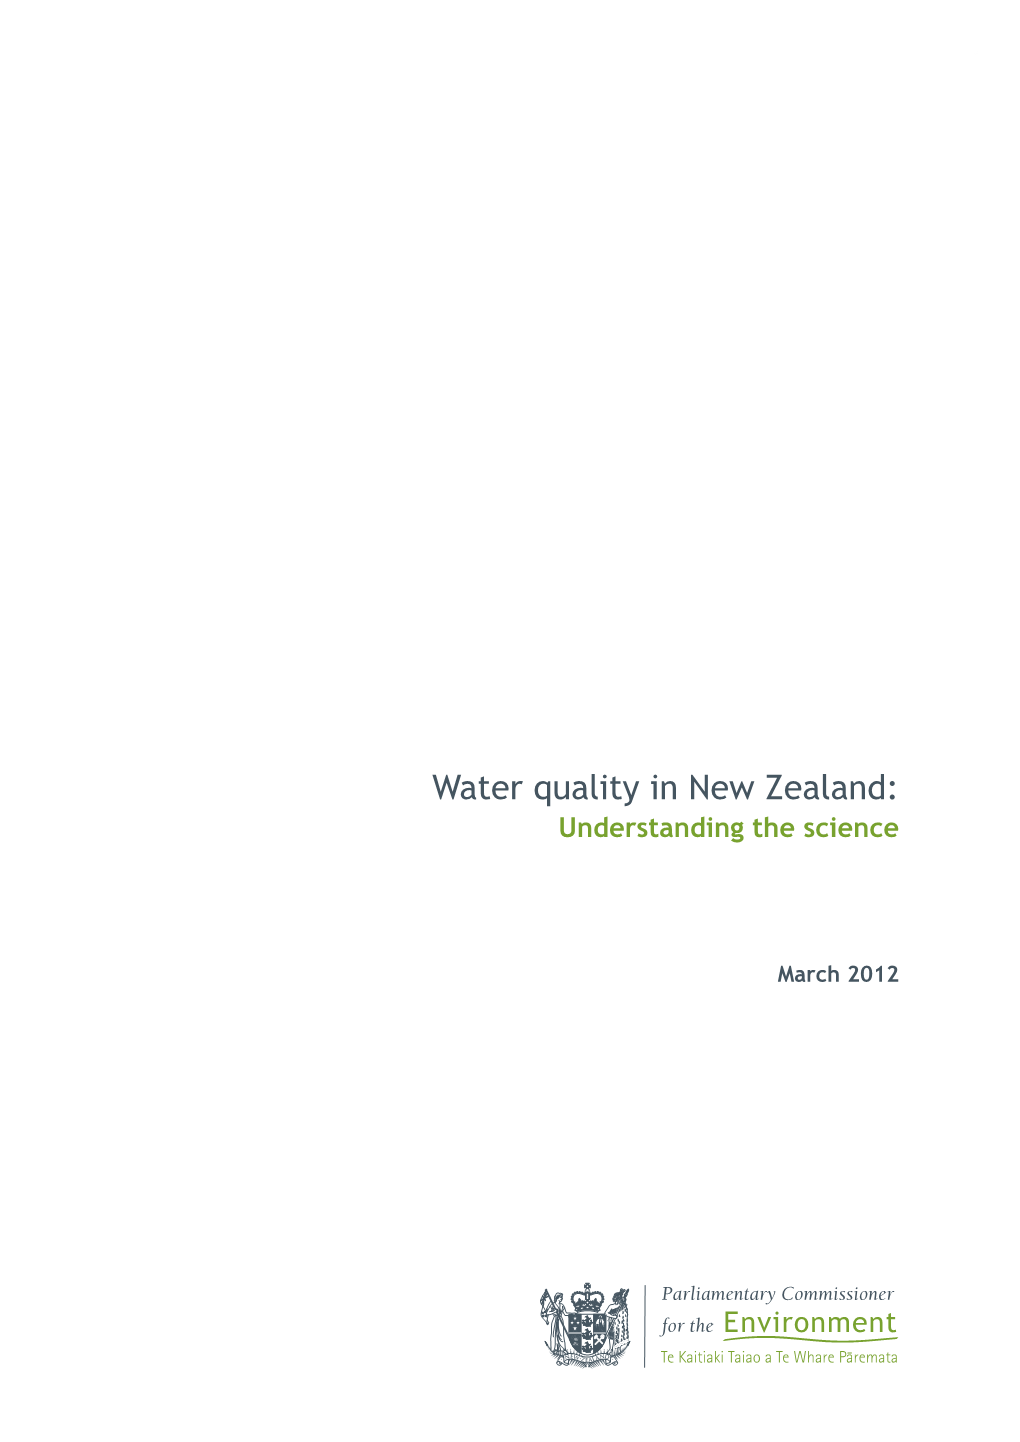 Water Quality in New Zealand: Understanding the Science